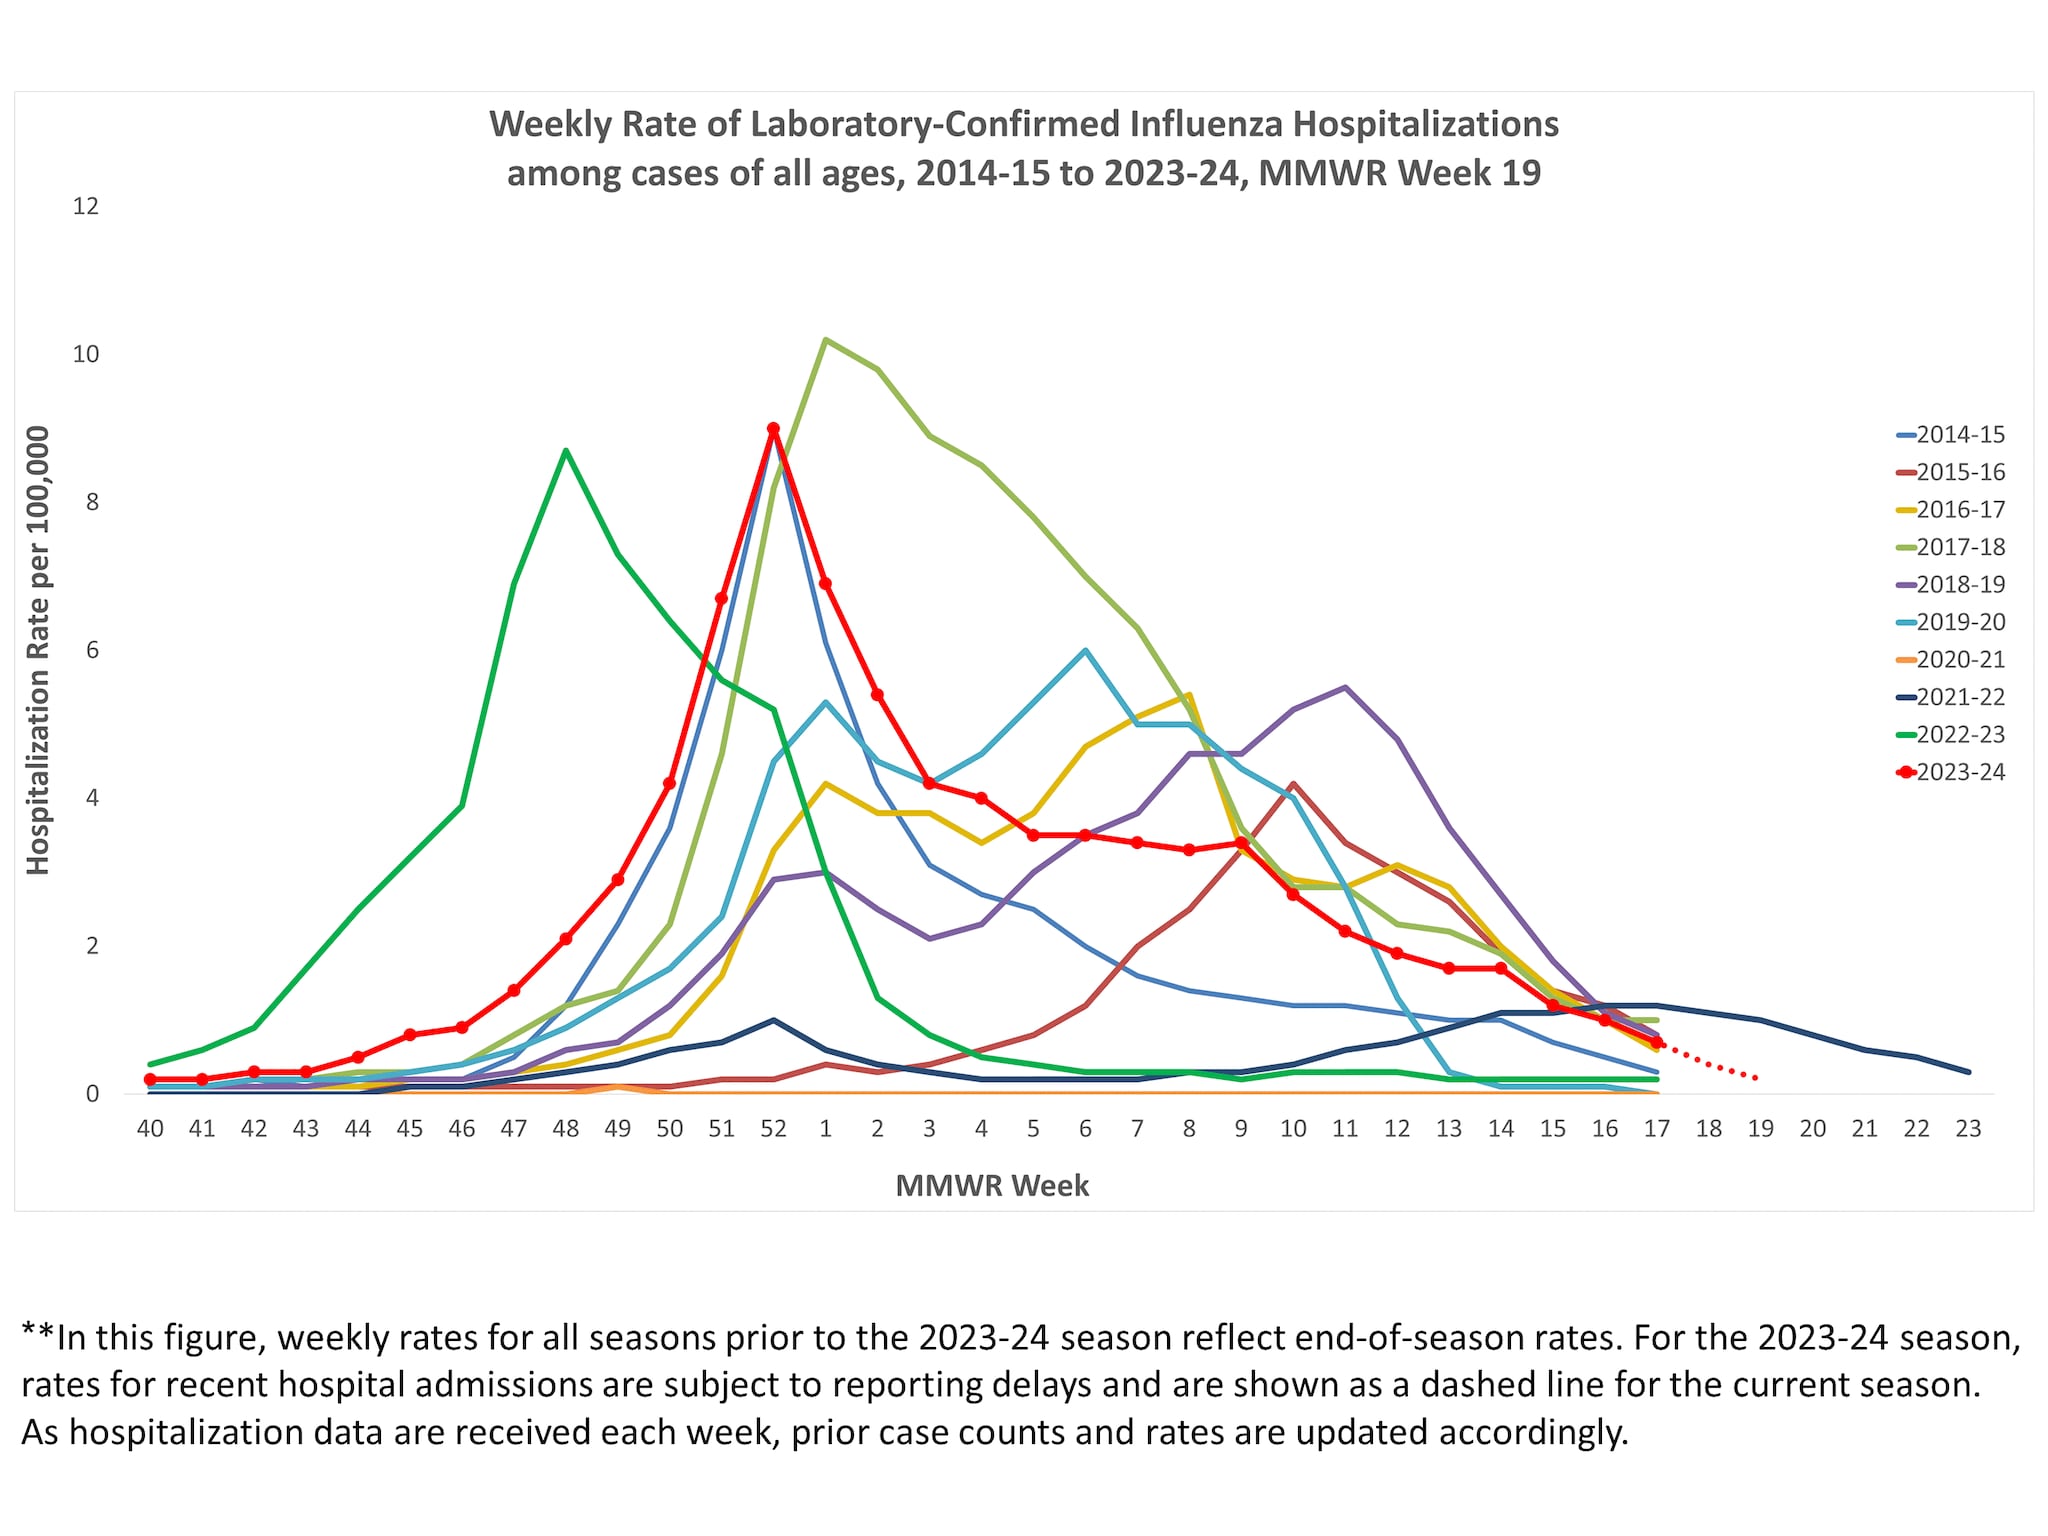 Selected underlying medical conditions in patients hospitalized with influenza, FluSurv-Net,  Season 2023-24